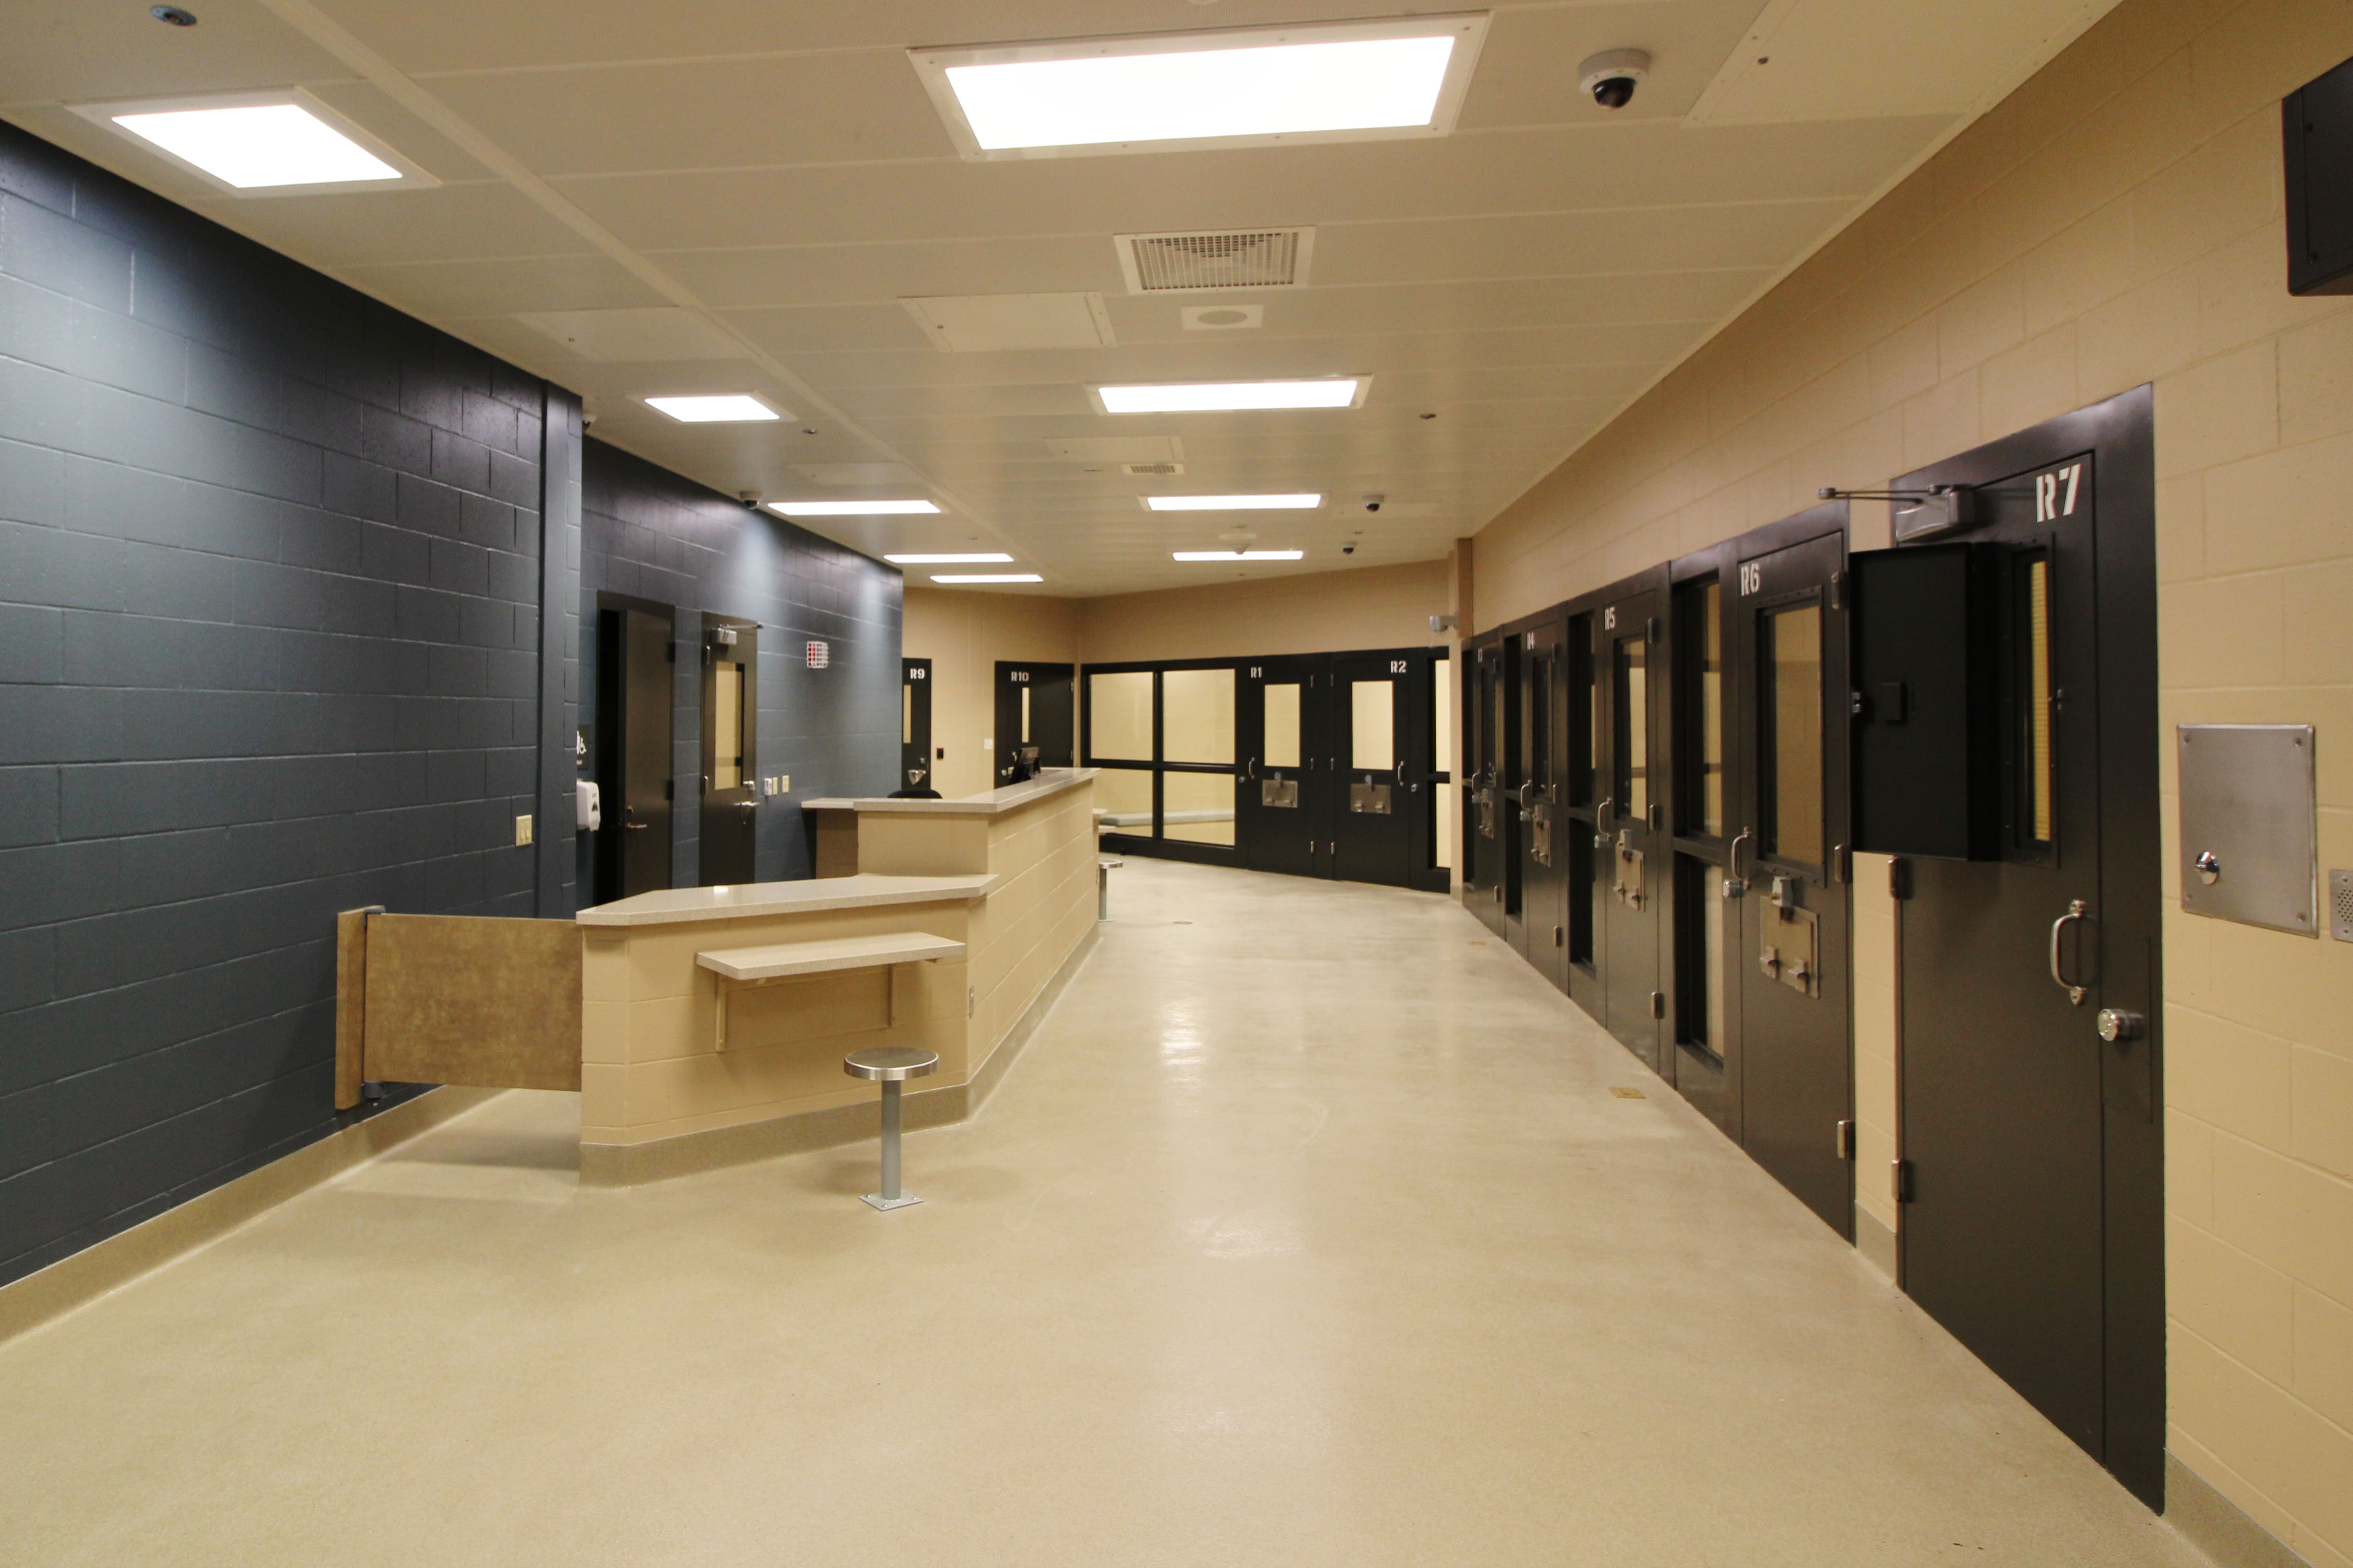 Unique Considerations For Jail Design Architecture And Construction